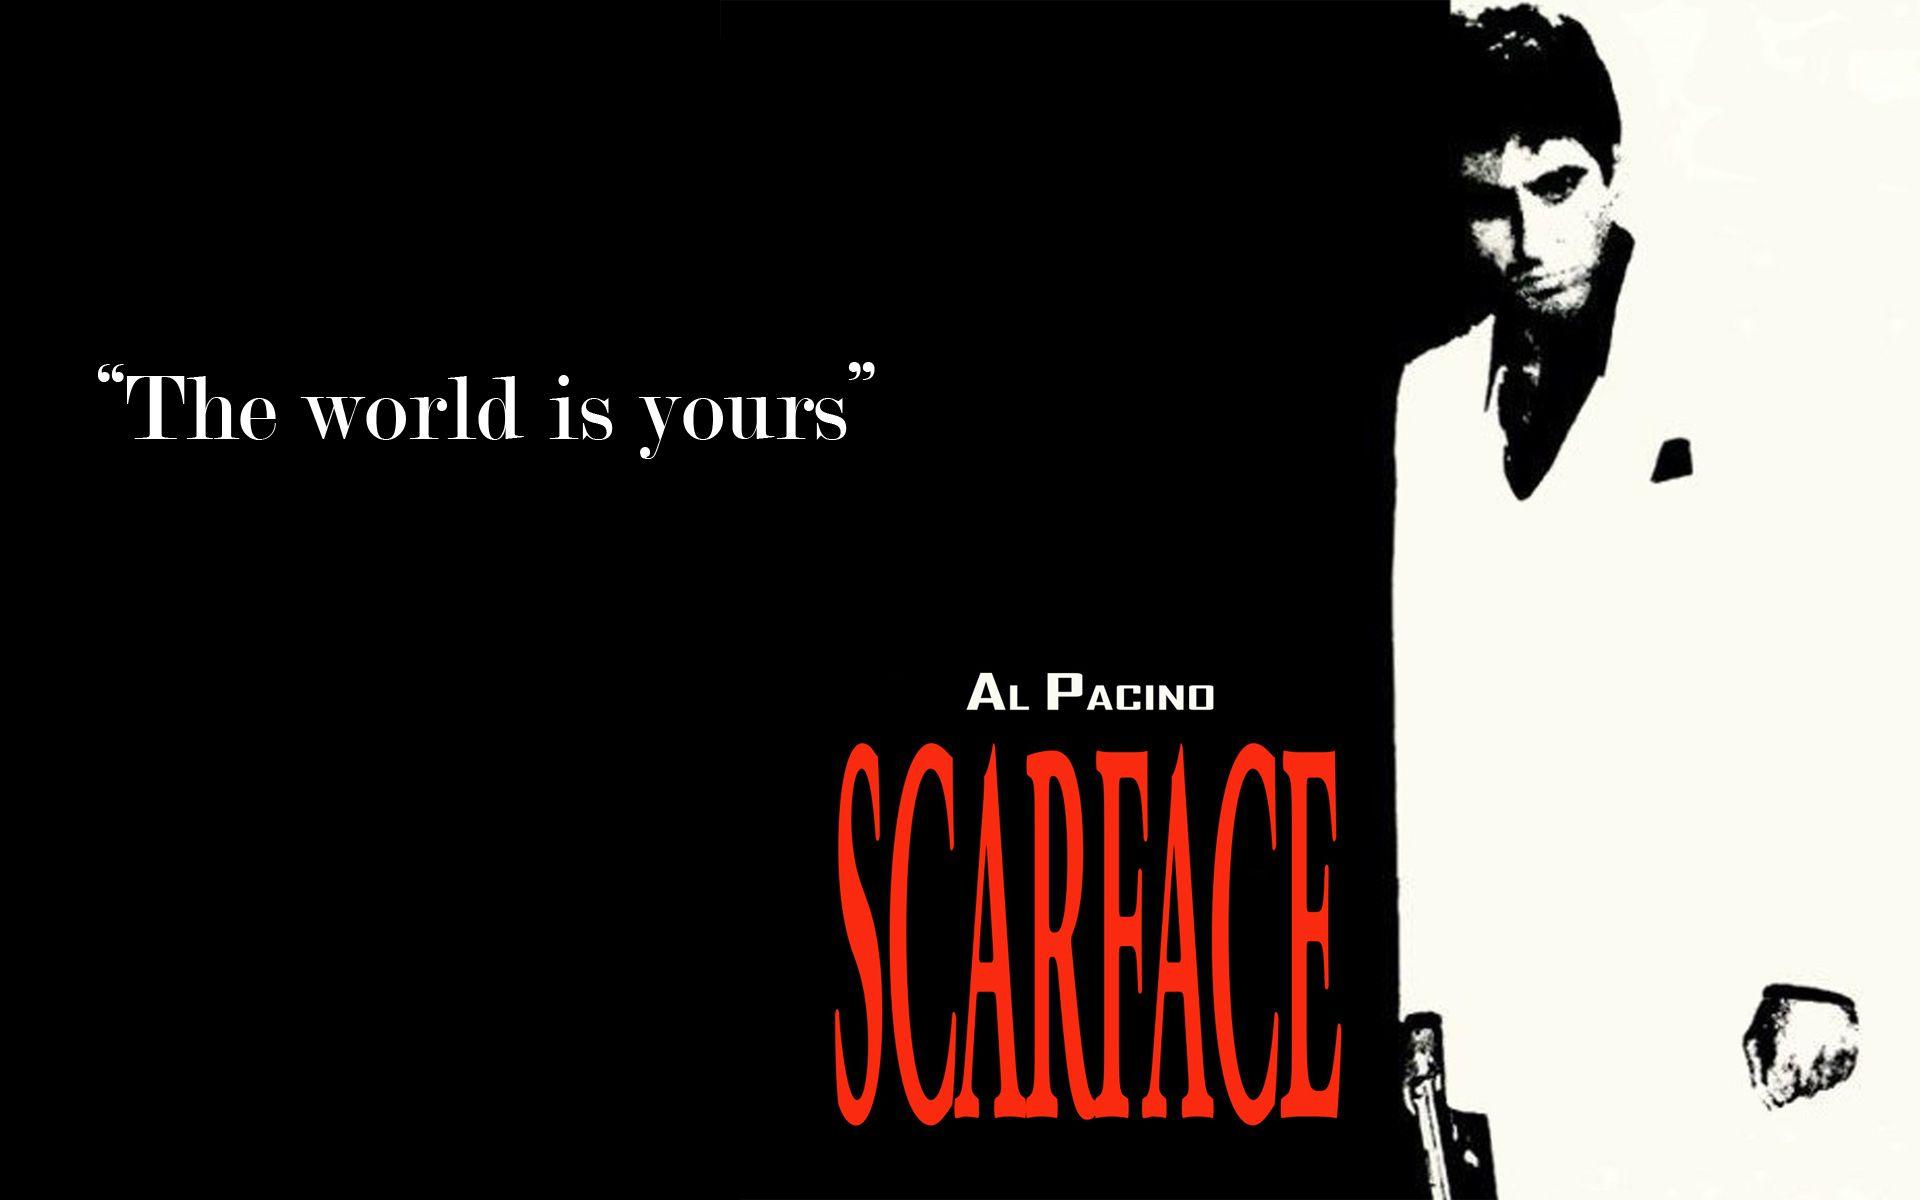 DA58: Scarface The World Is Yours Wallpapers, Scarface The World Is